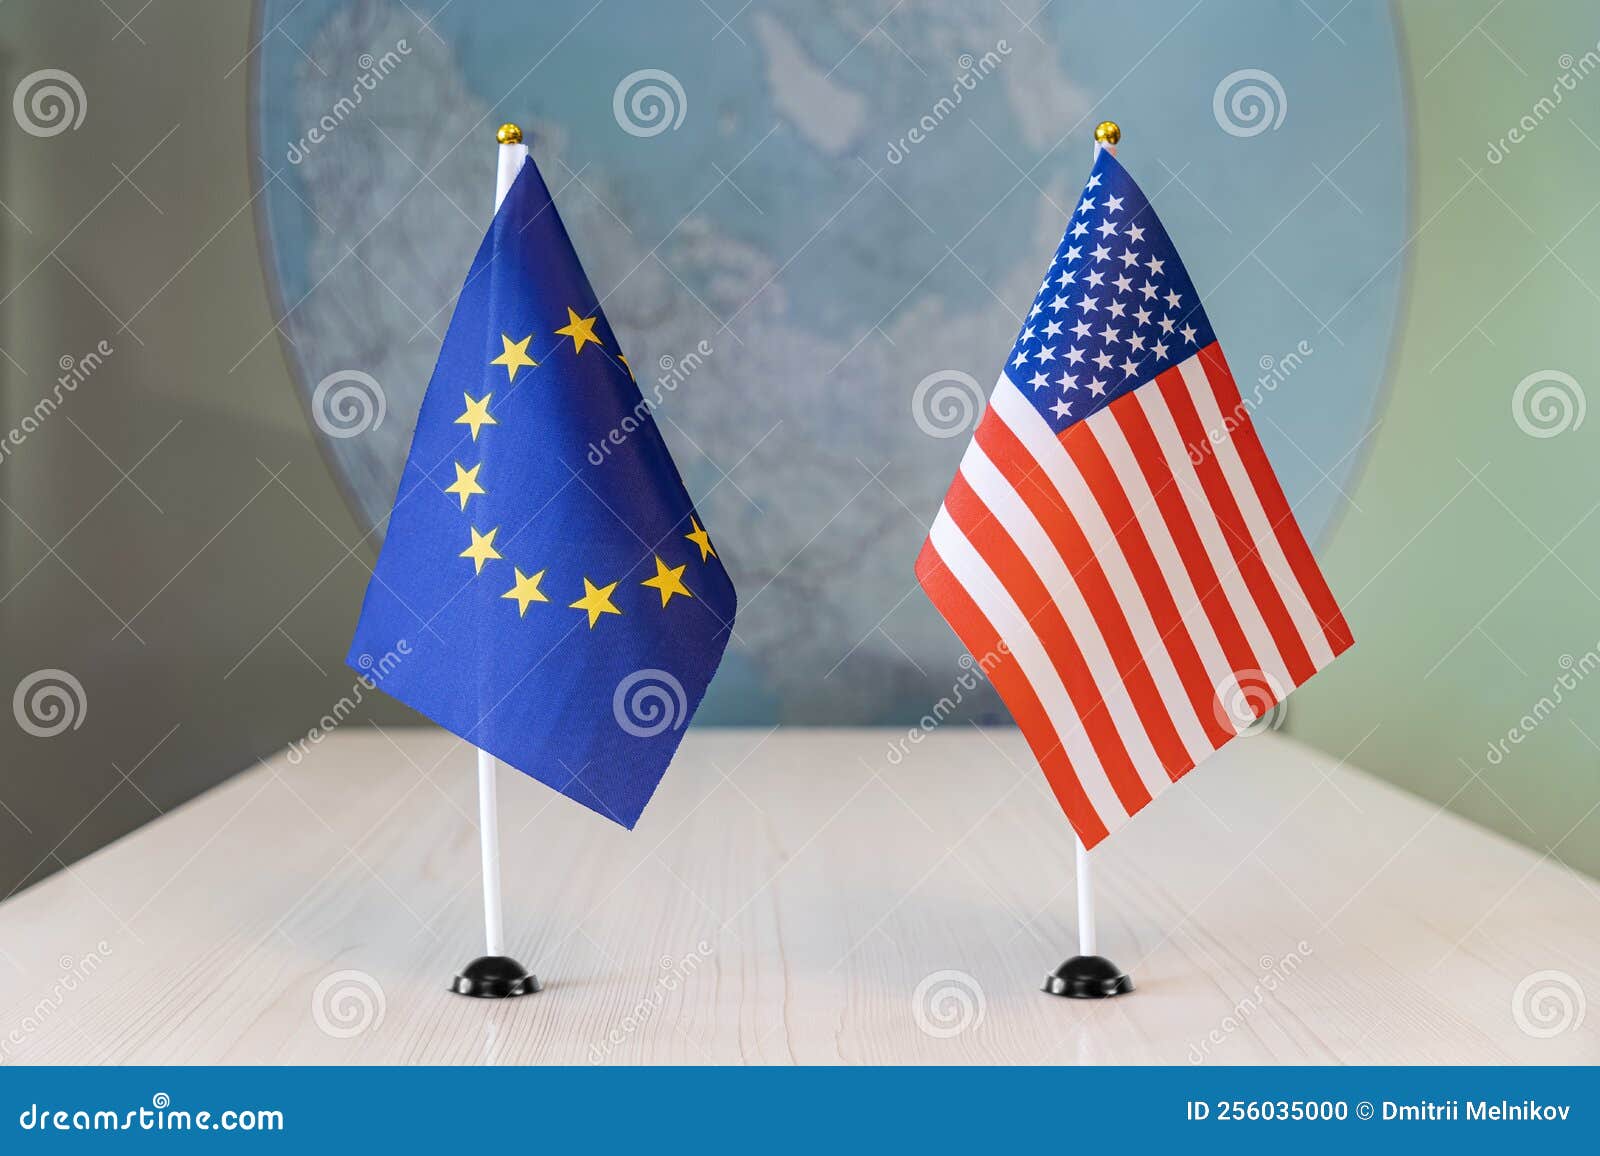 flags of united states and european union. international negotiations. conclusion of contracts between countries. concept of